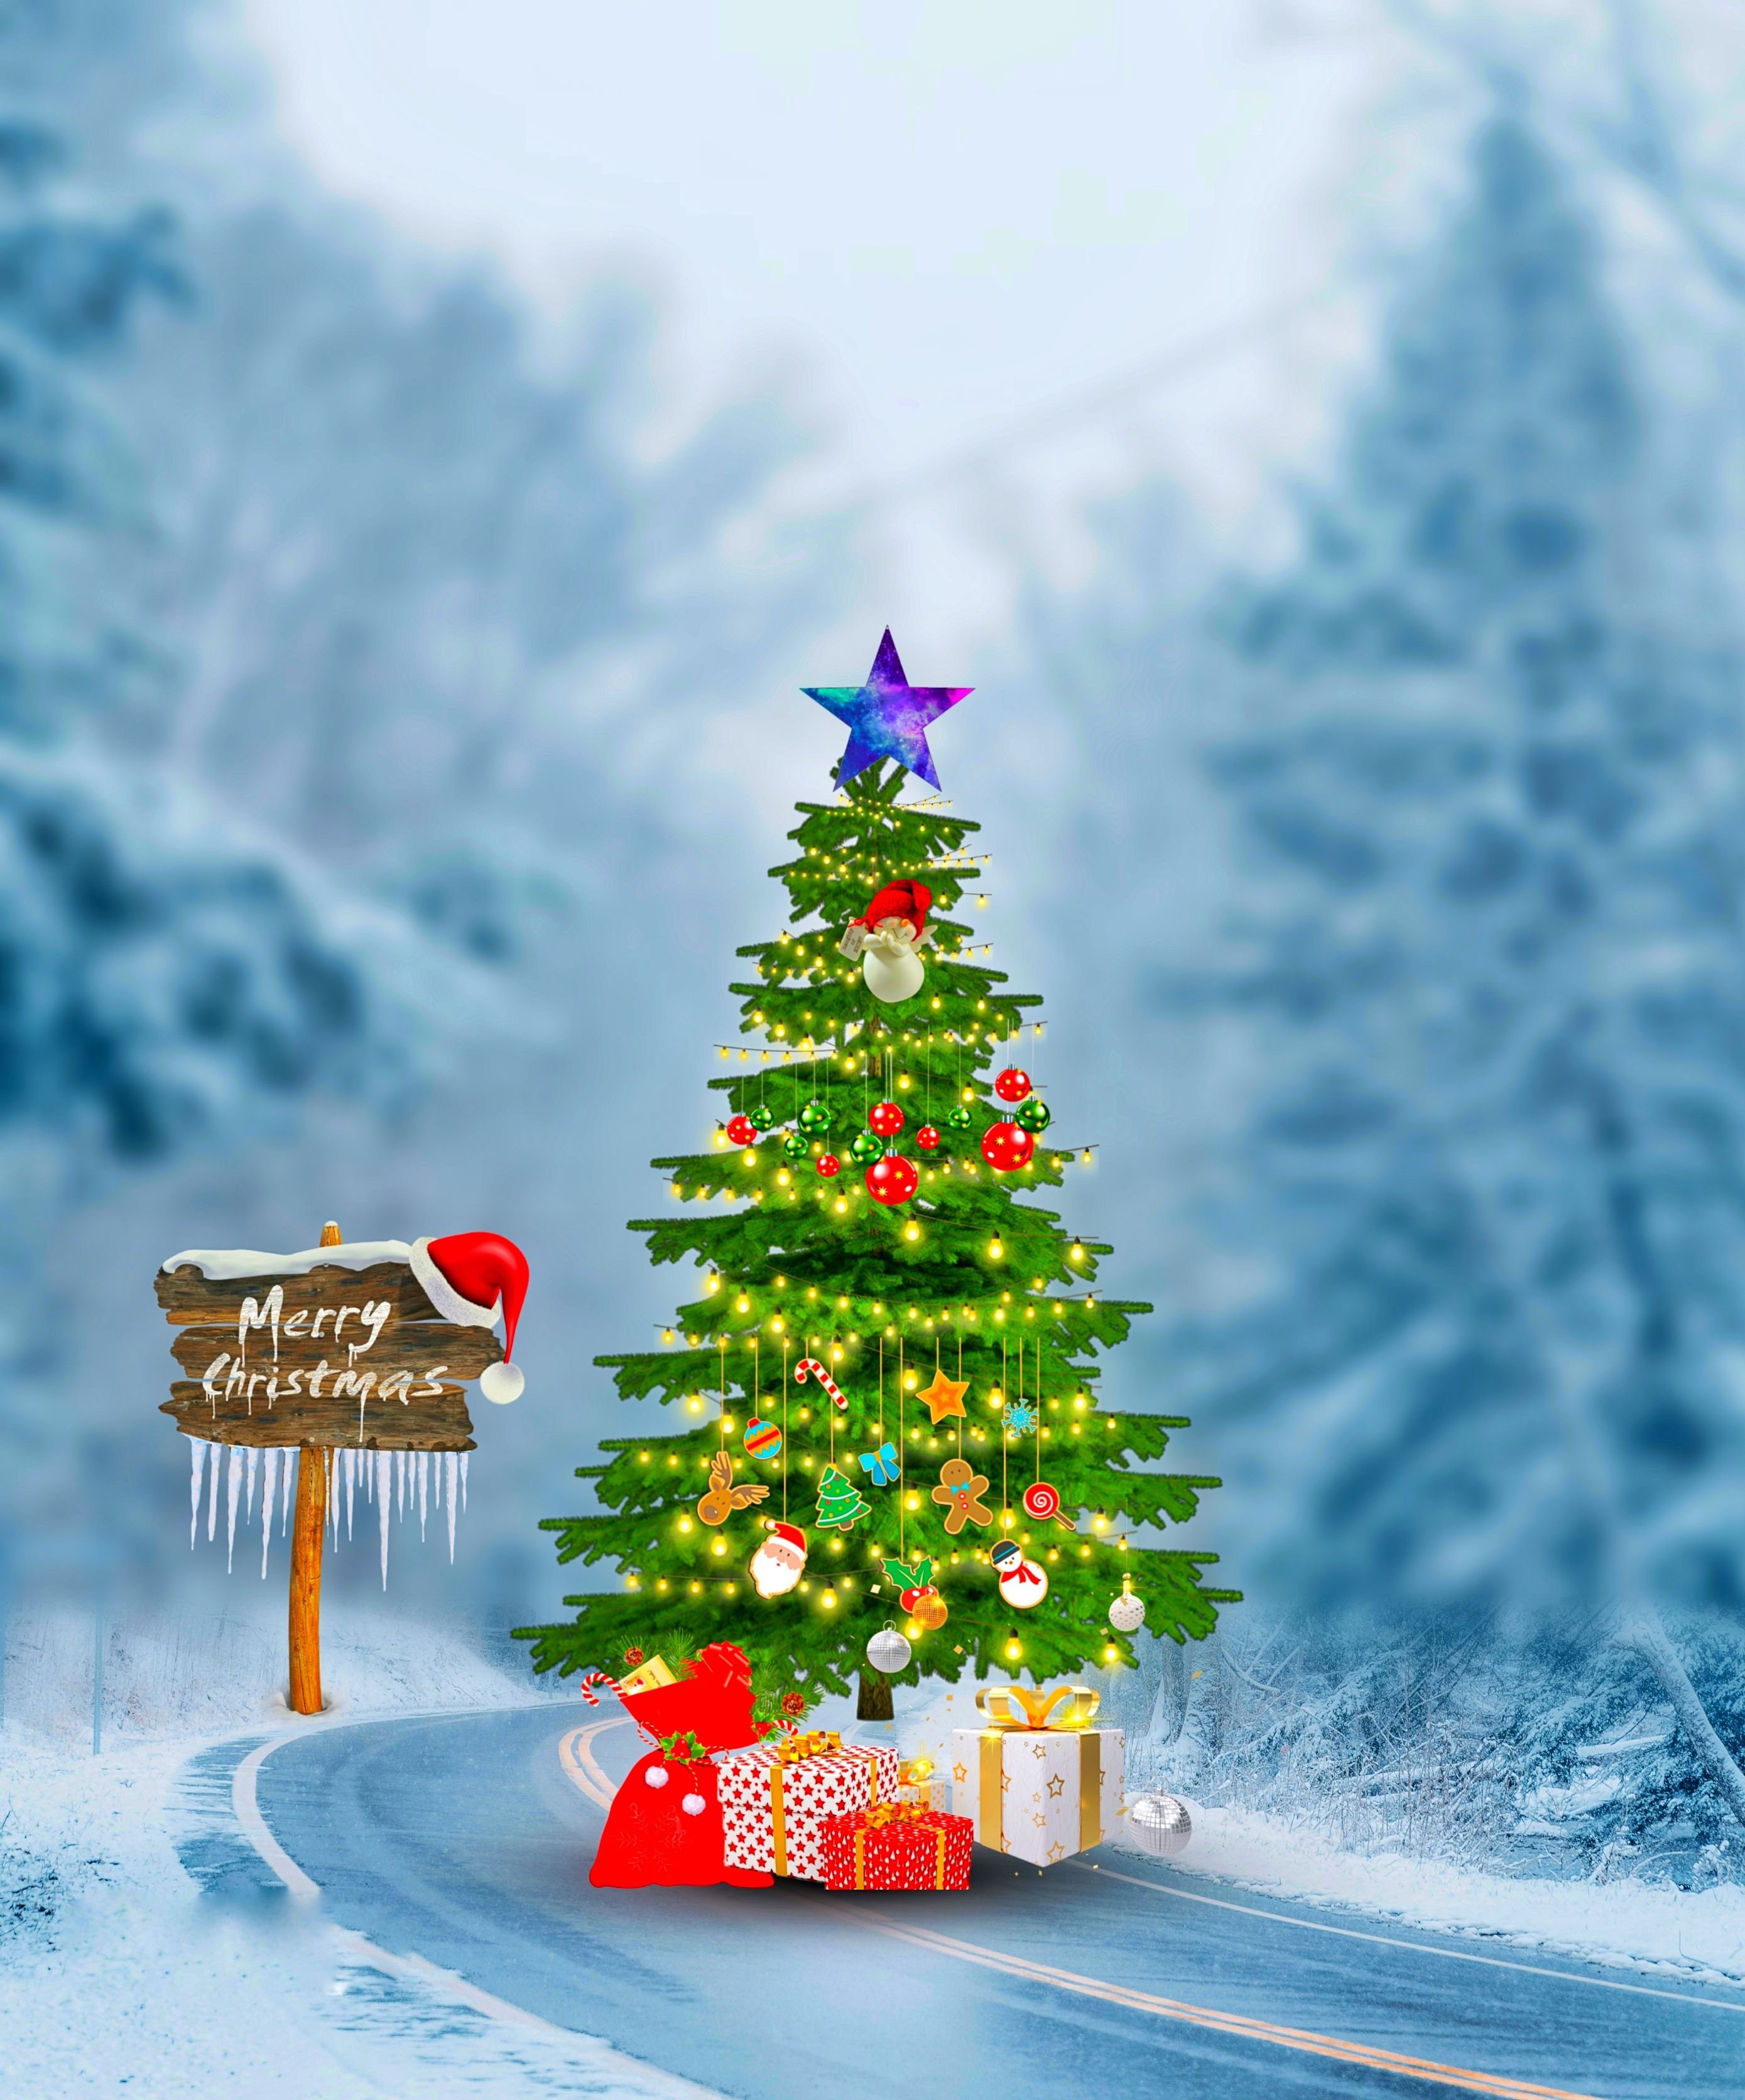 Merry Christmas Background HD Image 